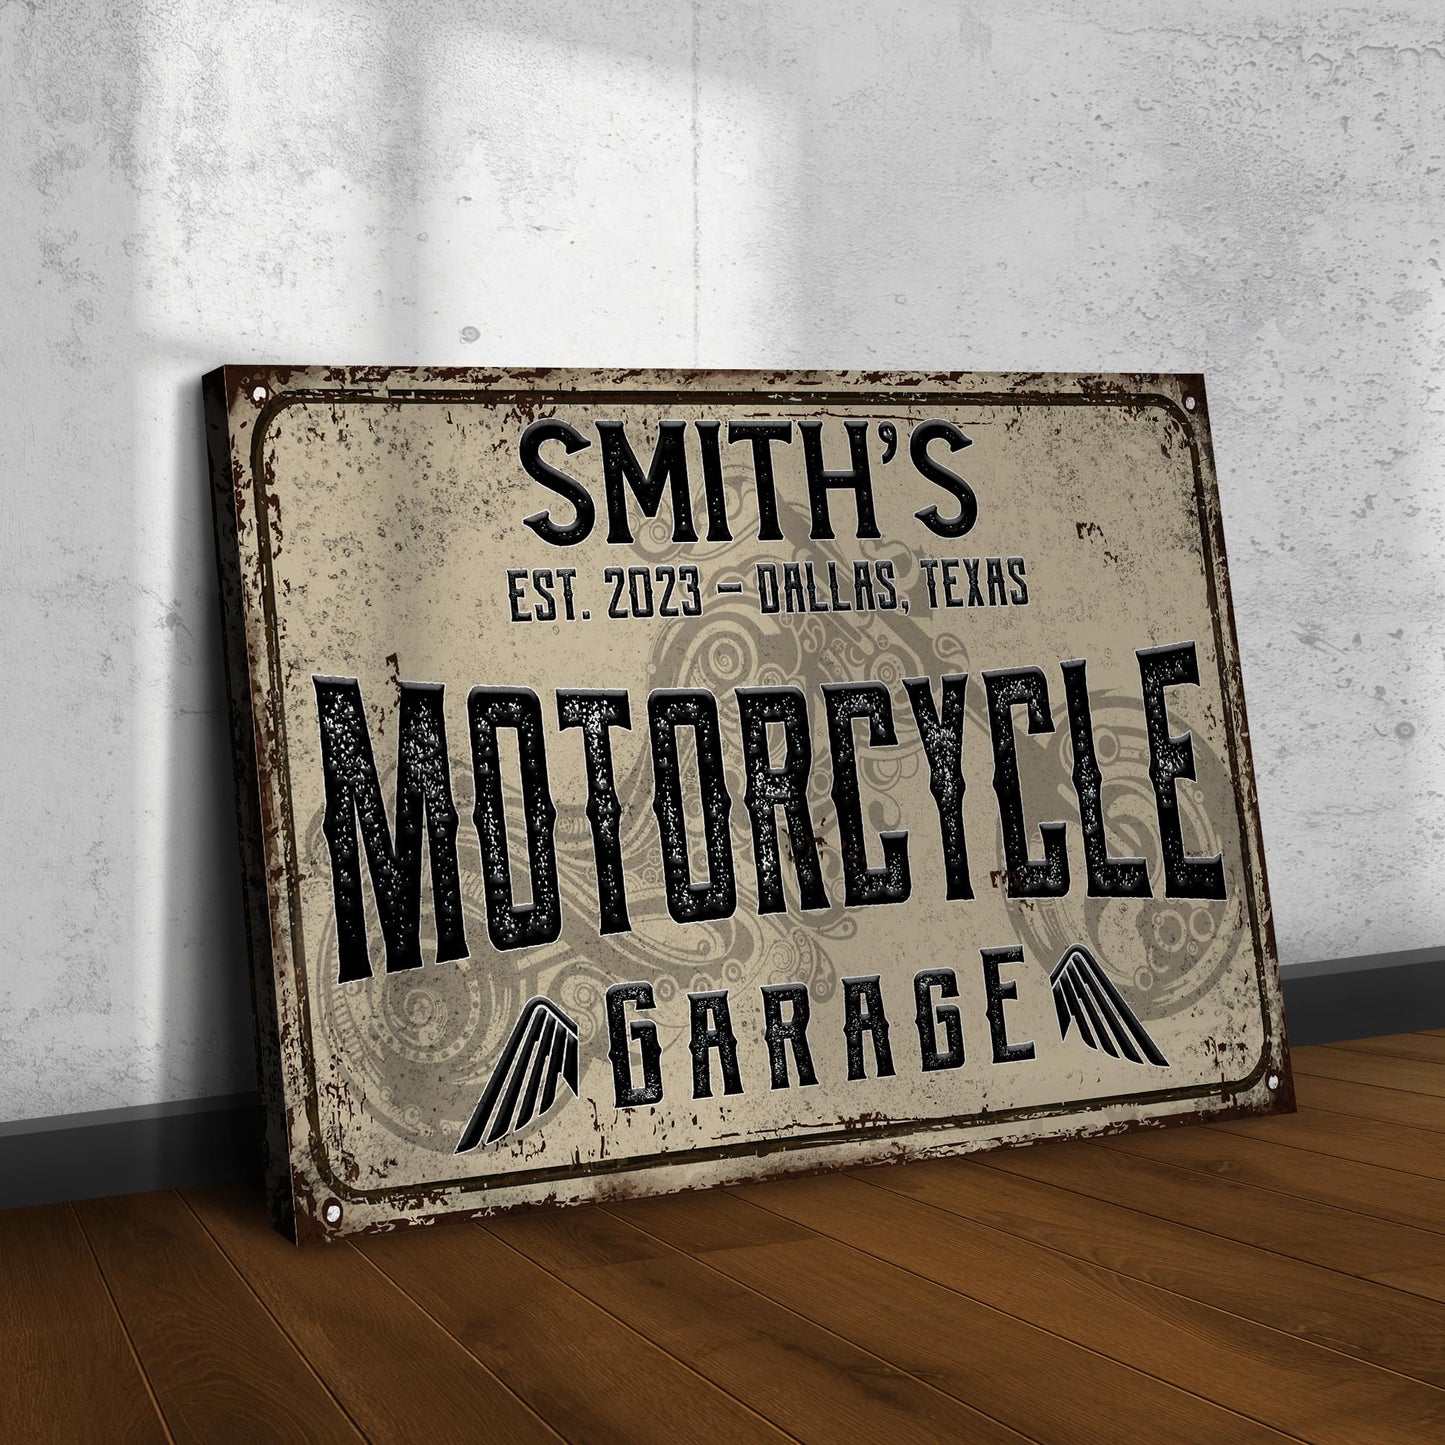 Motorcycle Garage Sign - Image by Tailored Canvases